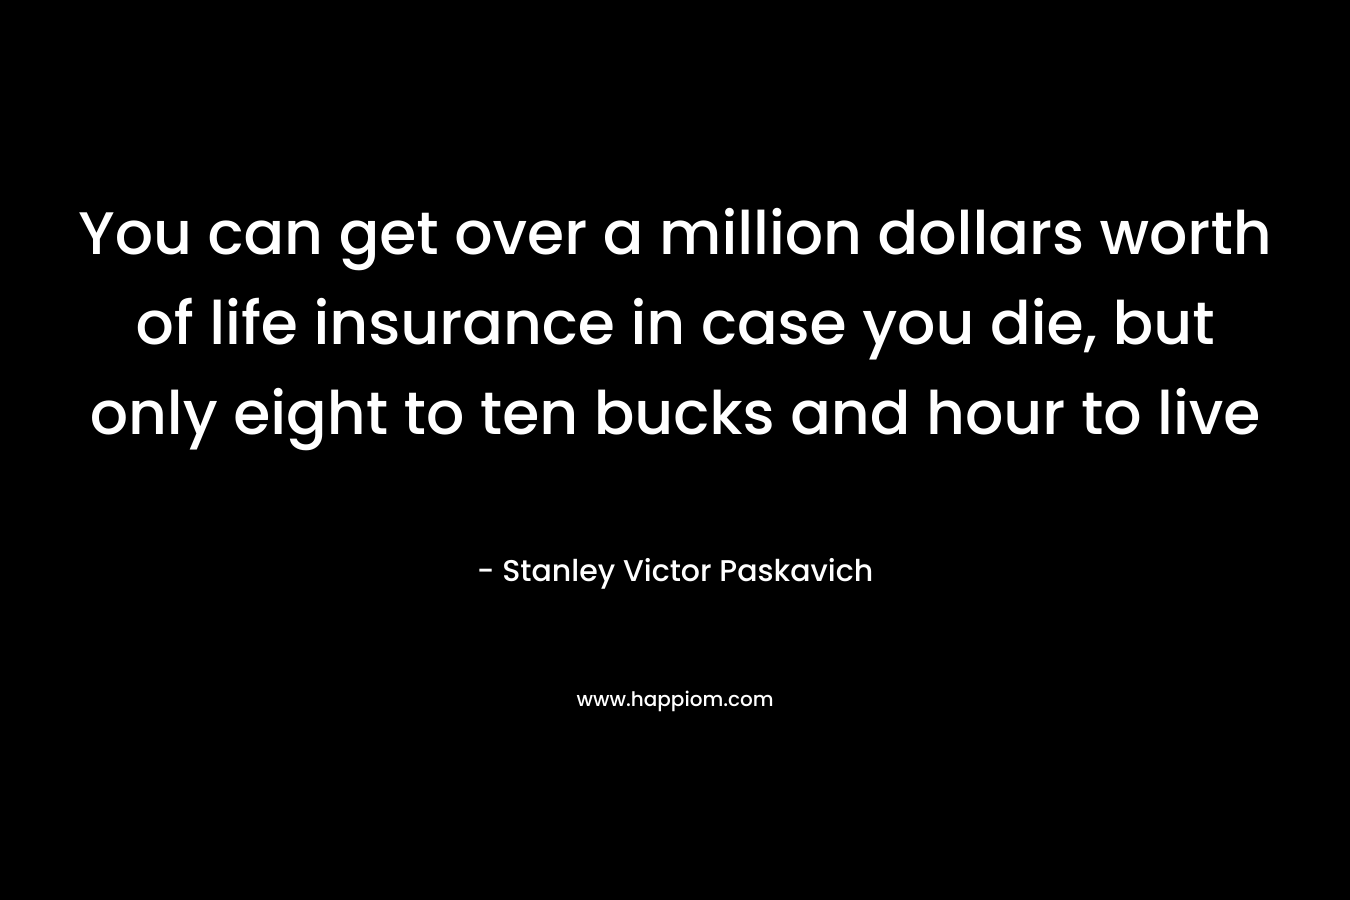 You can get over a million dollars worth of life insurance in case you die, but only eight to ten bucks and hour to live